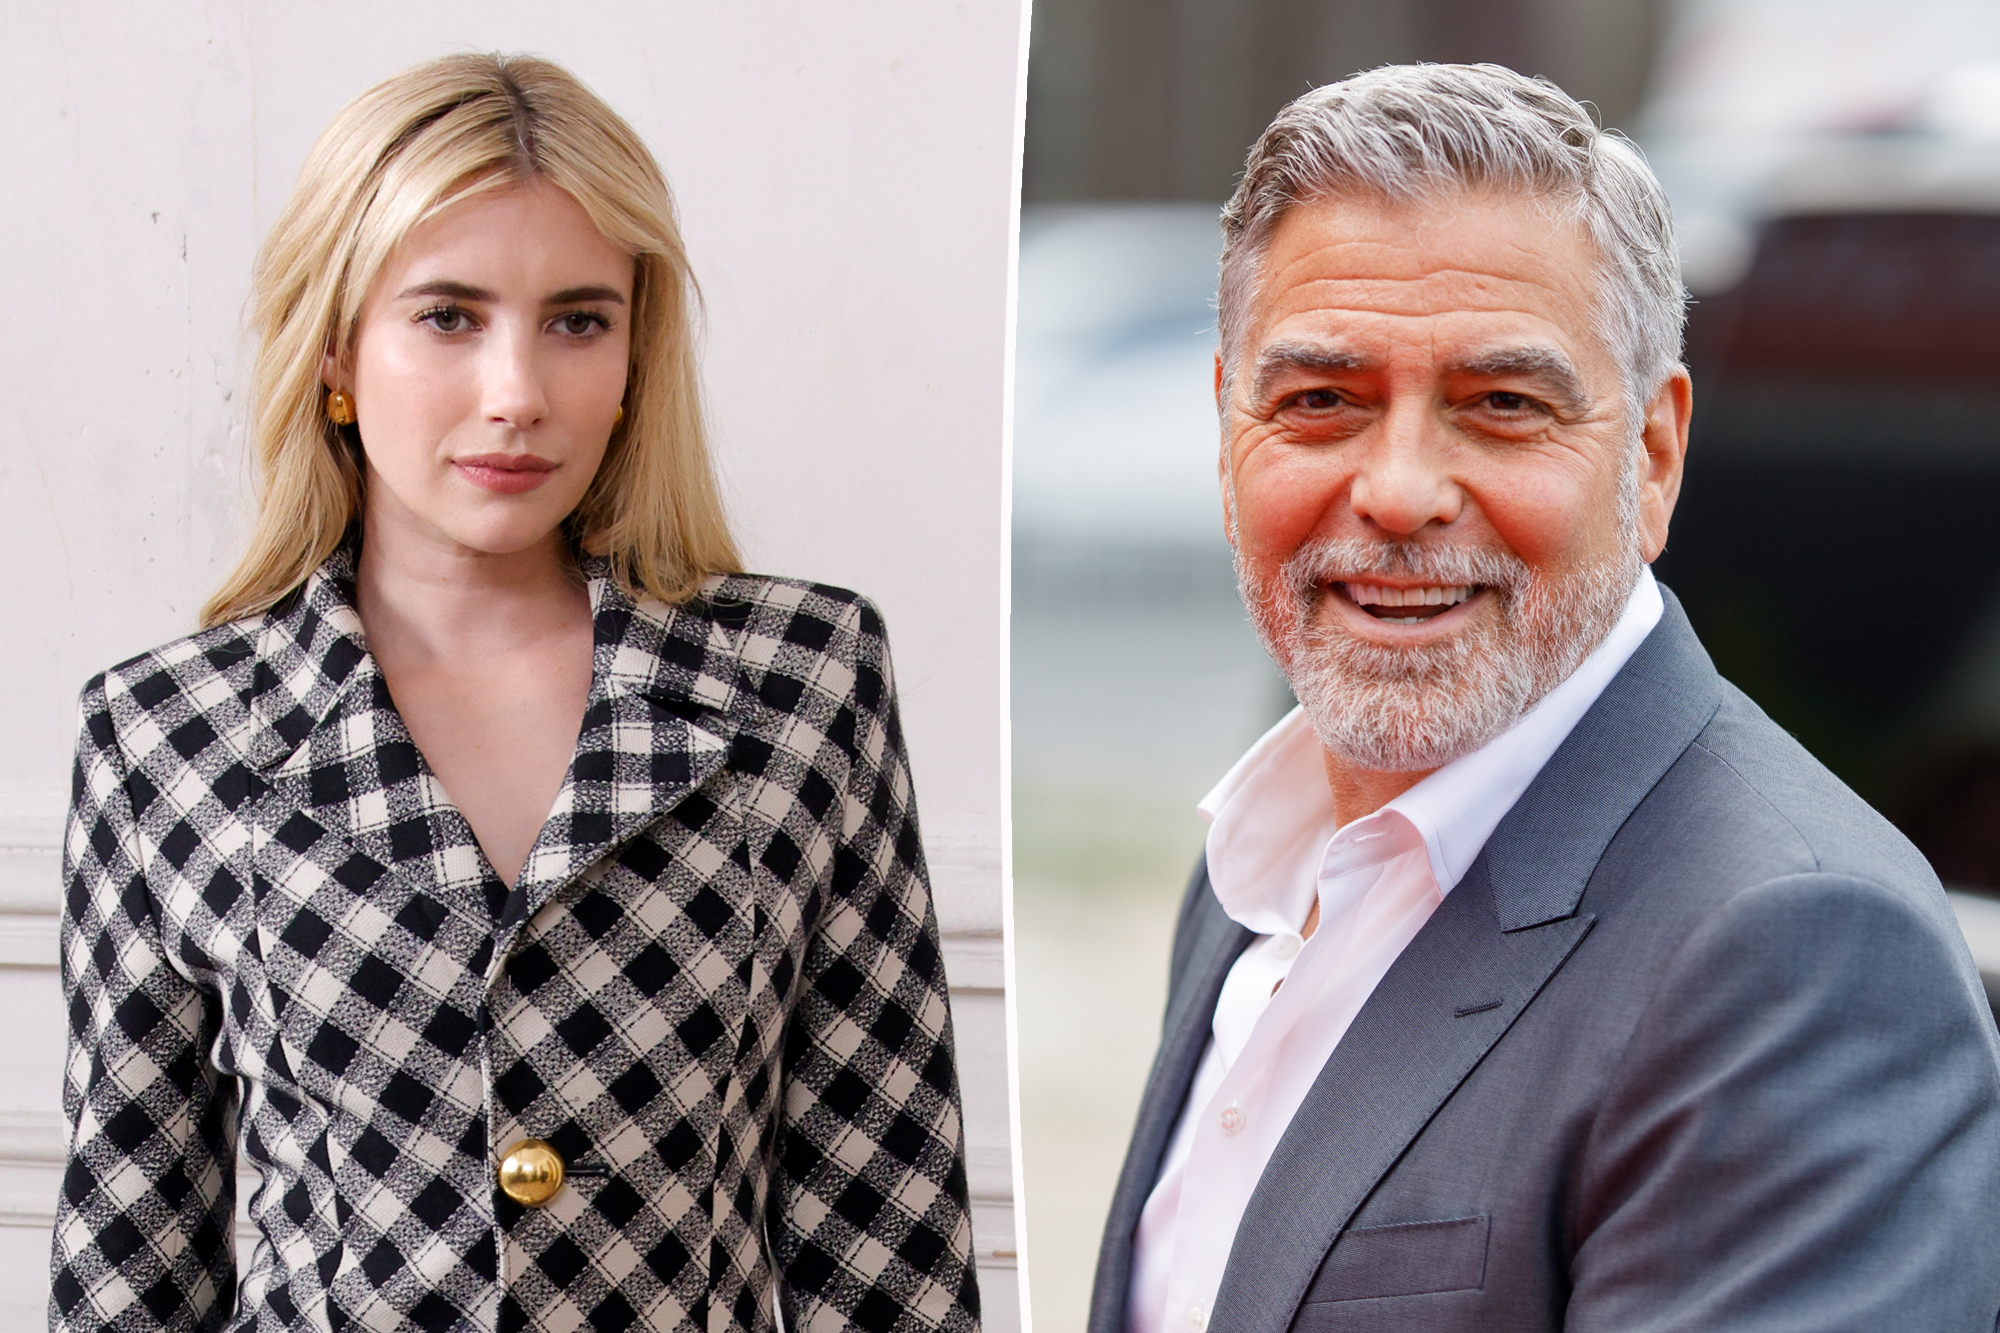 Emma Roberts Sparks Debate on Nepotism in Hollywood: Why Are Women Targeted More Than Men?